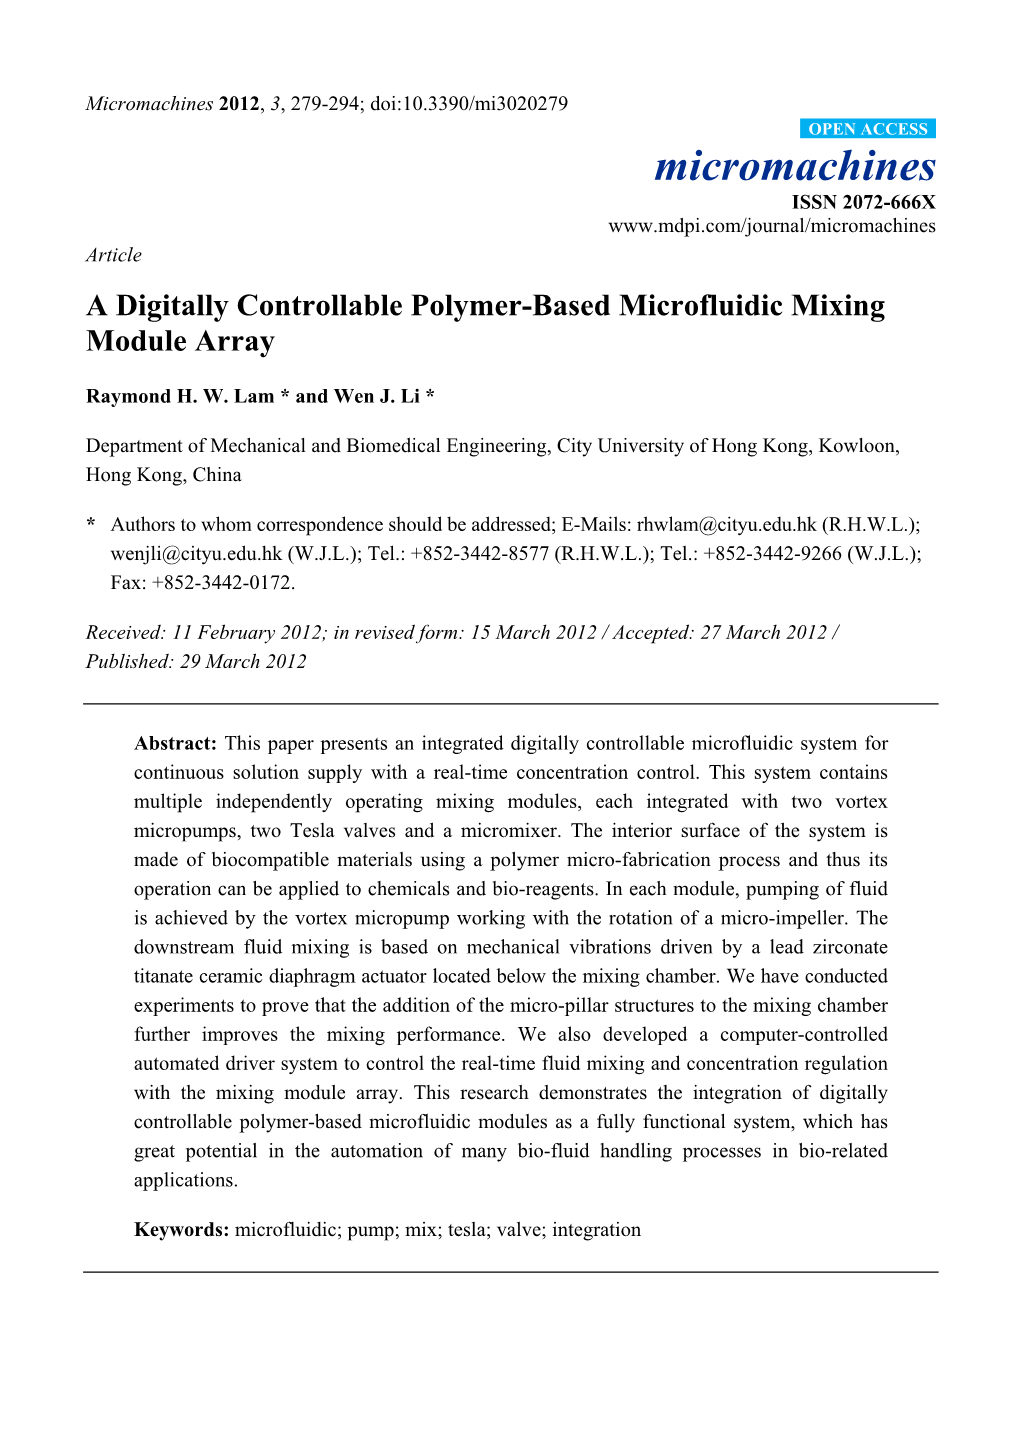 A Digitally Controllable Polymer-Based Microfluidic Mixing Module Array